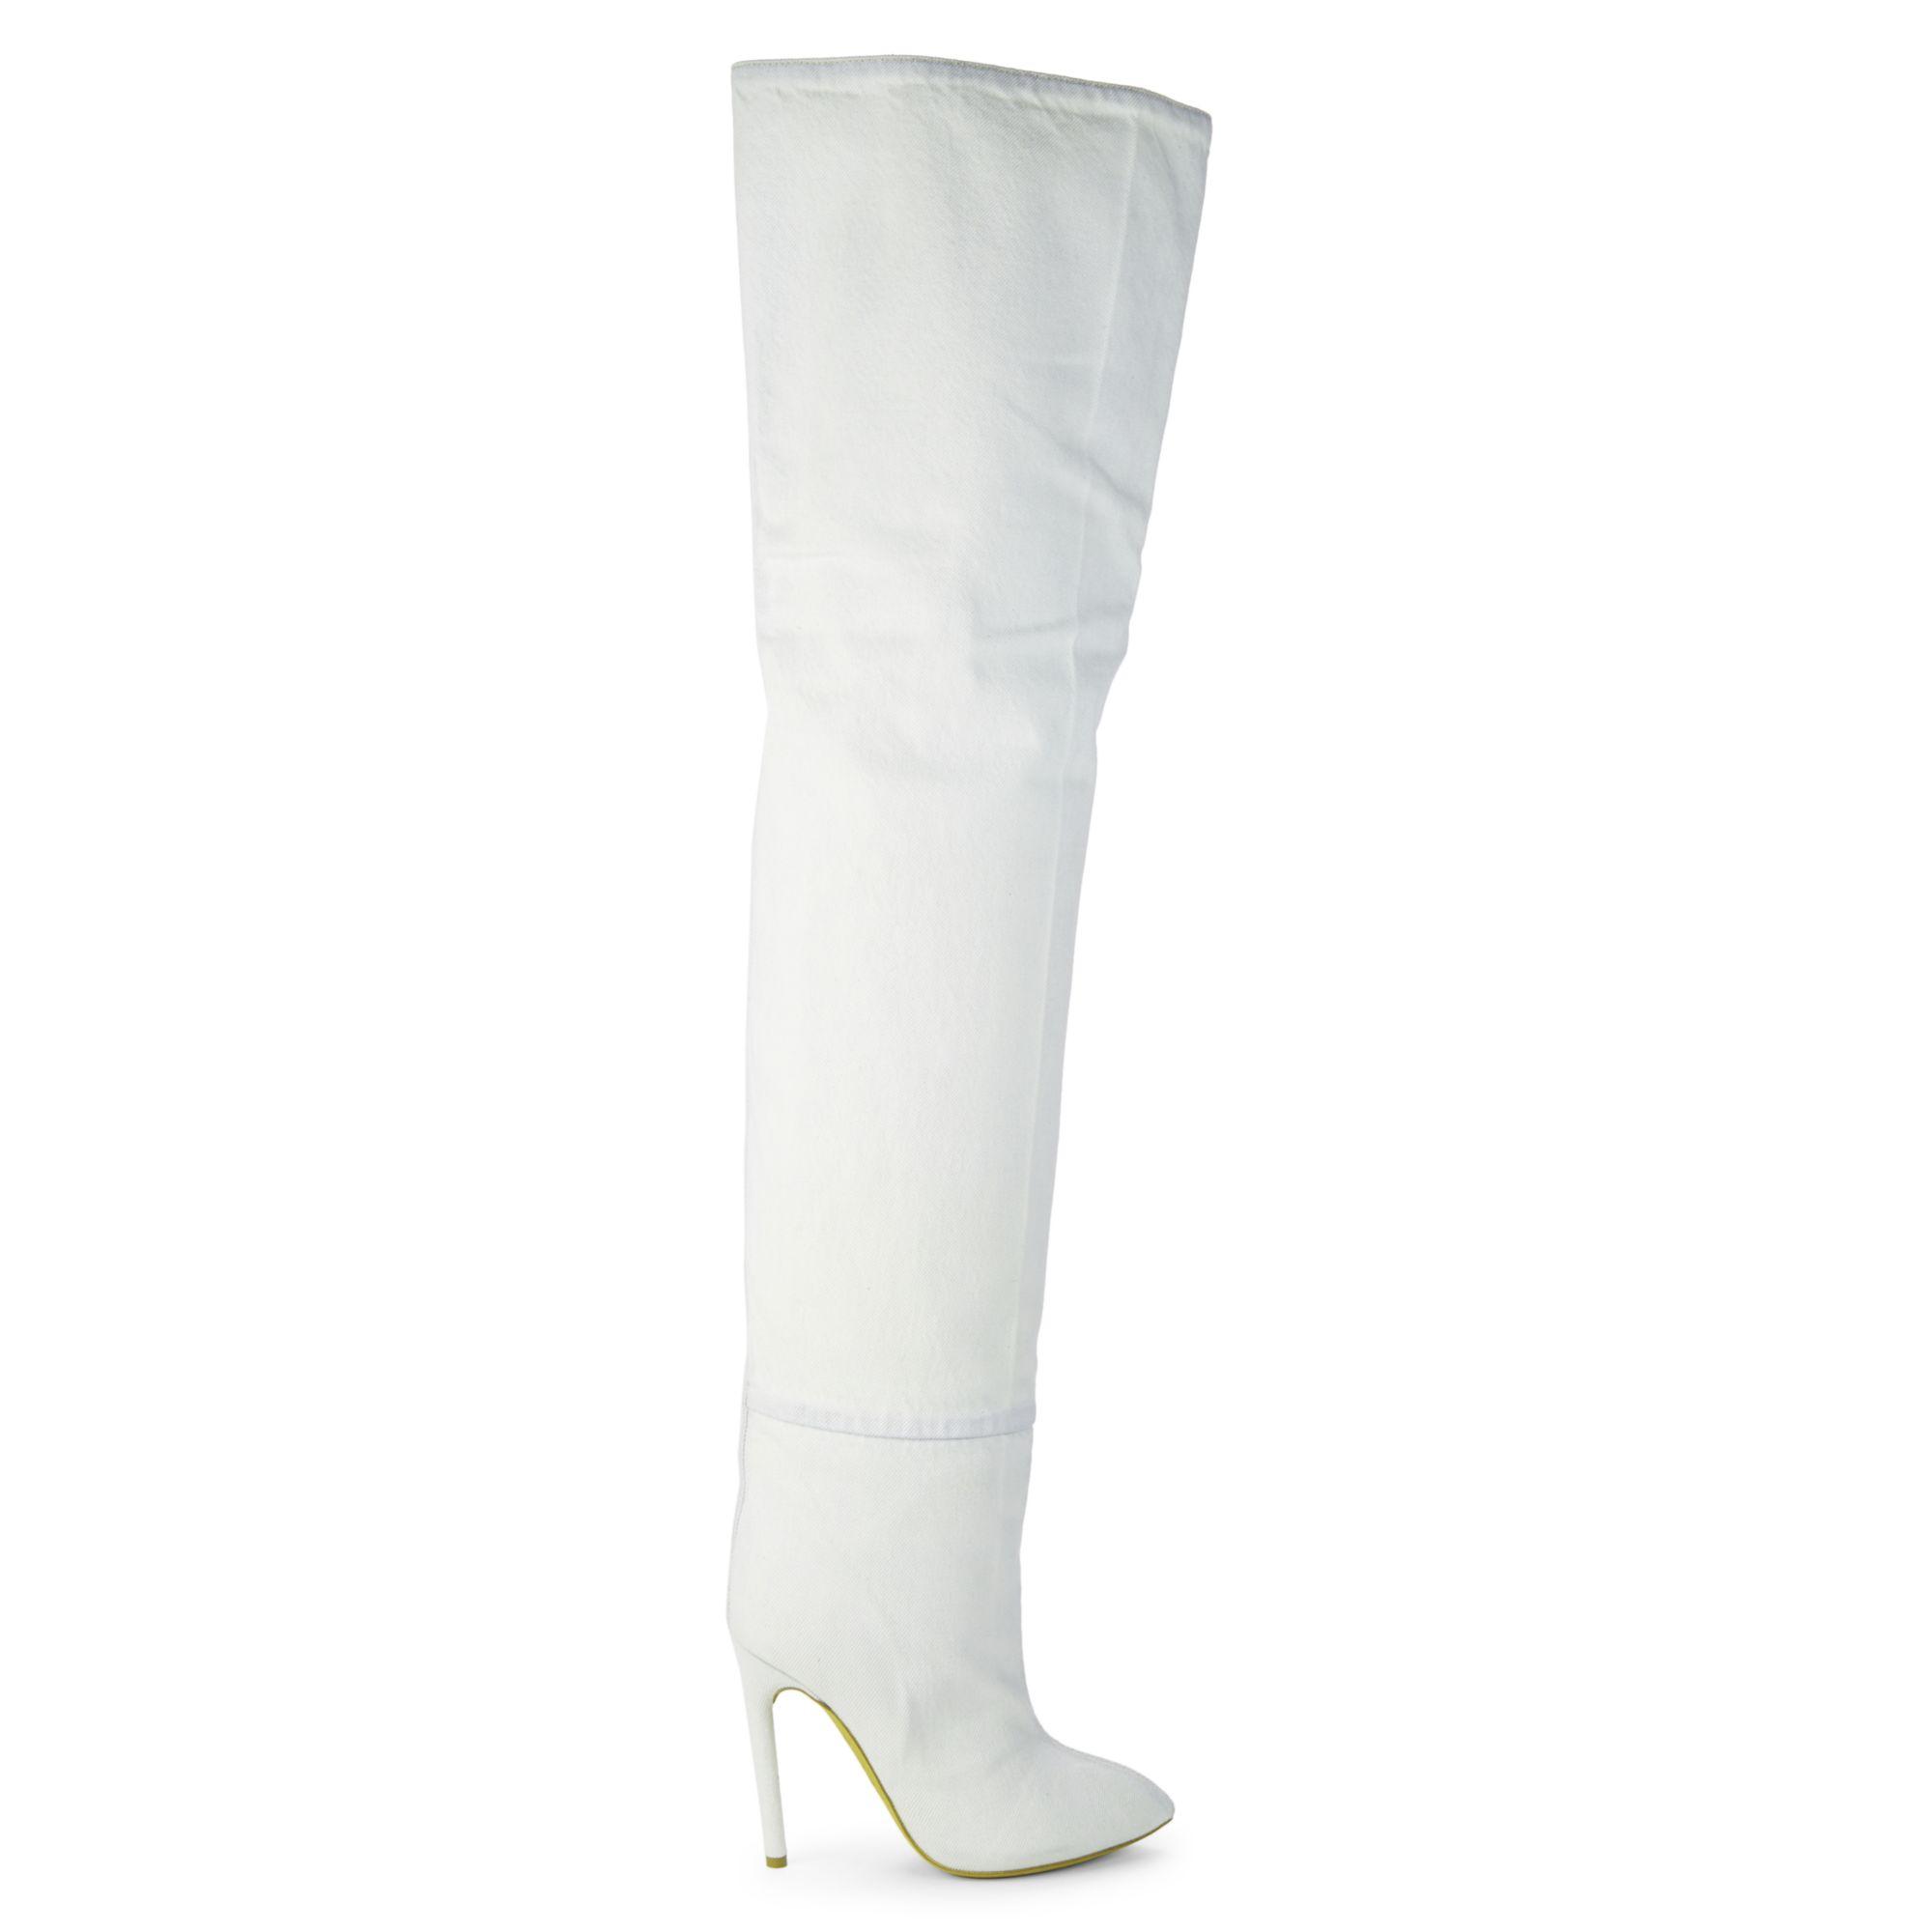 Yeezy Leather Tubular Over-the-knee Boots in White - Lyst